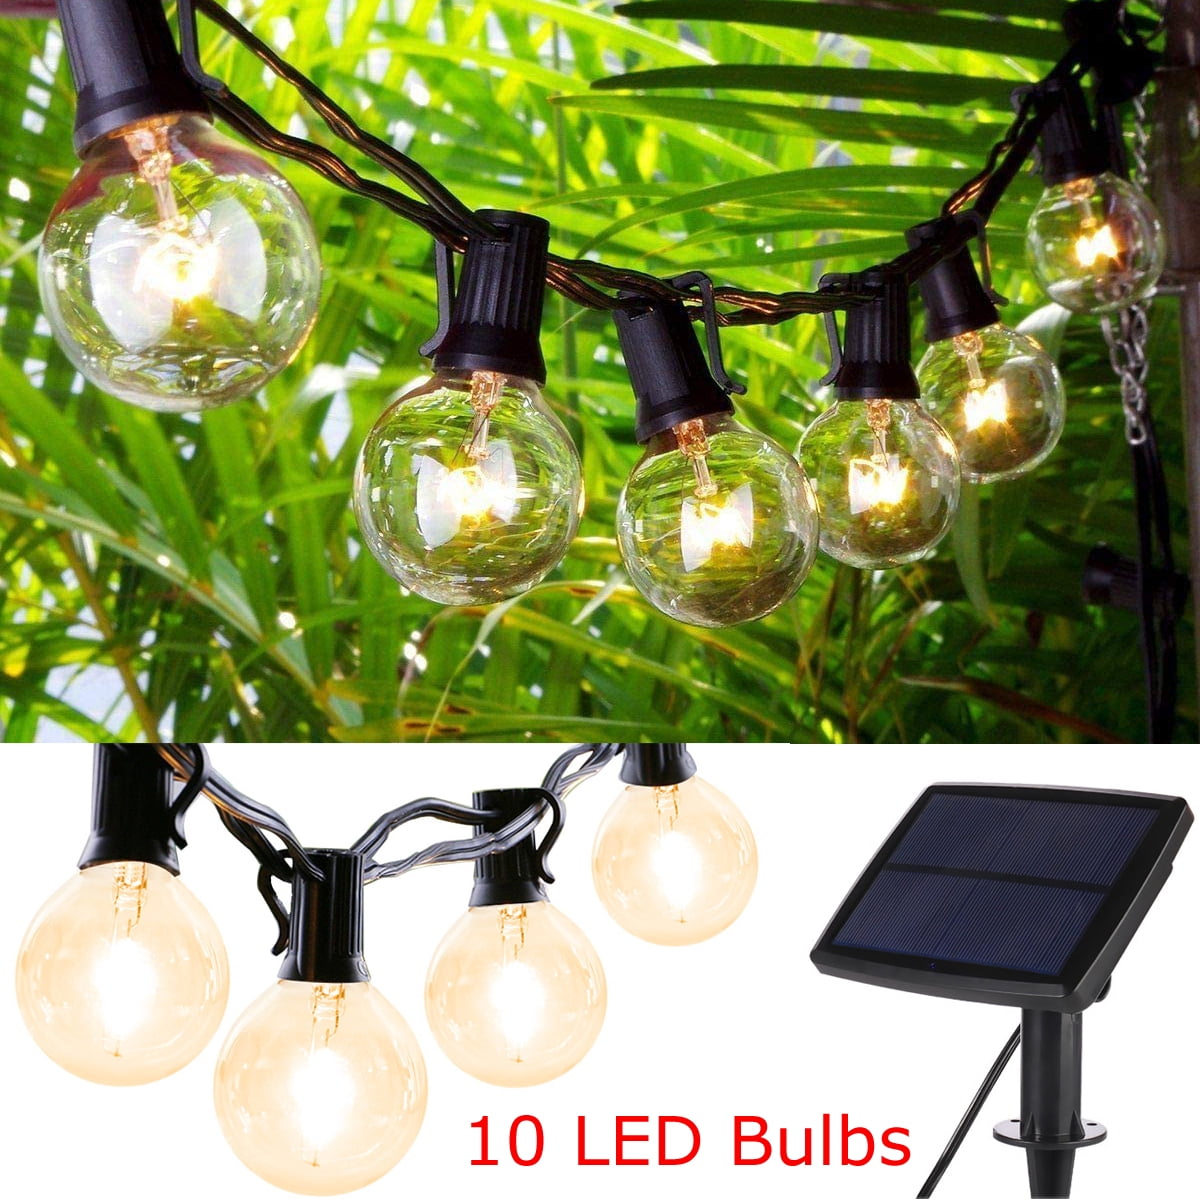 Crystal Ball Solar Lamps Outdoor Waterproof Fairy Light High Graded Quality Bulb 